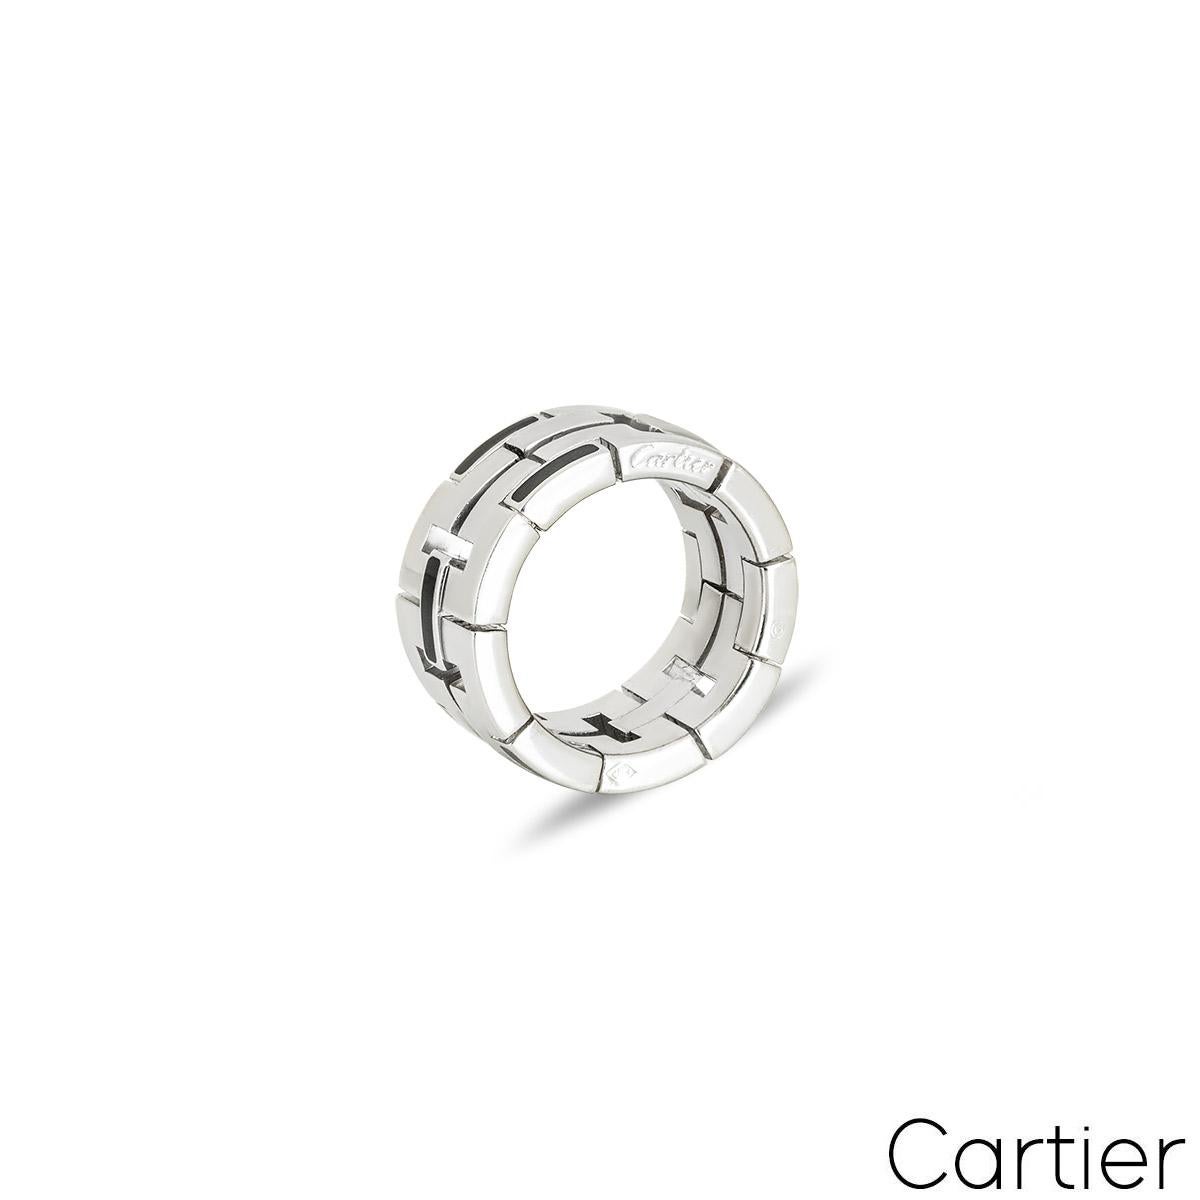 An 18k white gold dress ring from by Cartier from the Le Baiser Du Dragon collection. The square abstract design alternates with polished white gold and black enamel links. The ring measures 11mm in width and is a size UK H - EU 46 with a gross